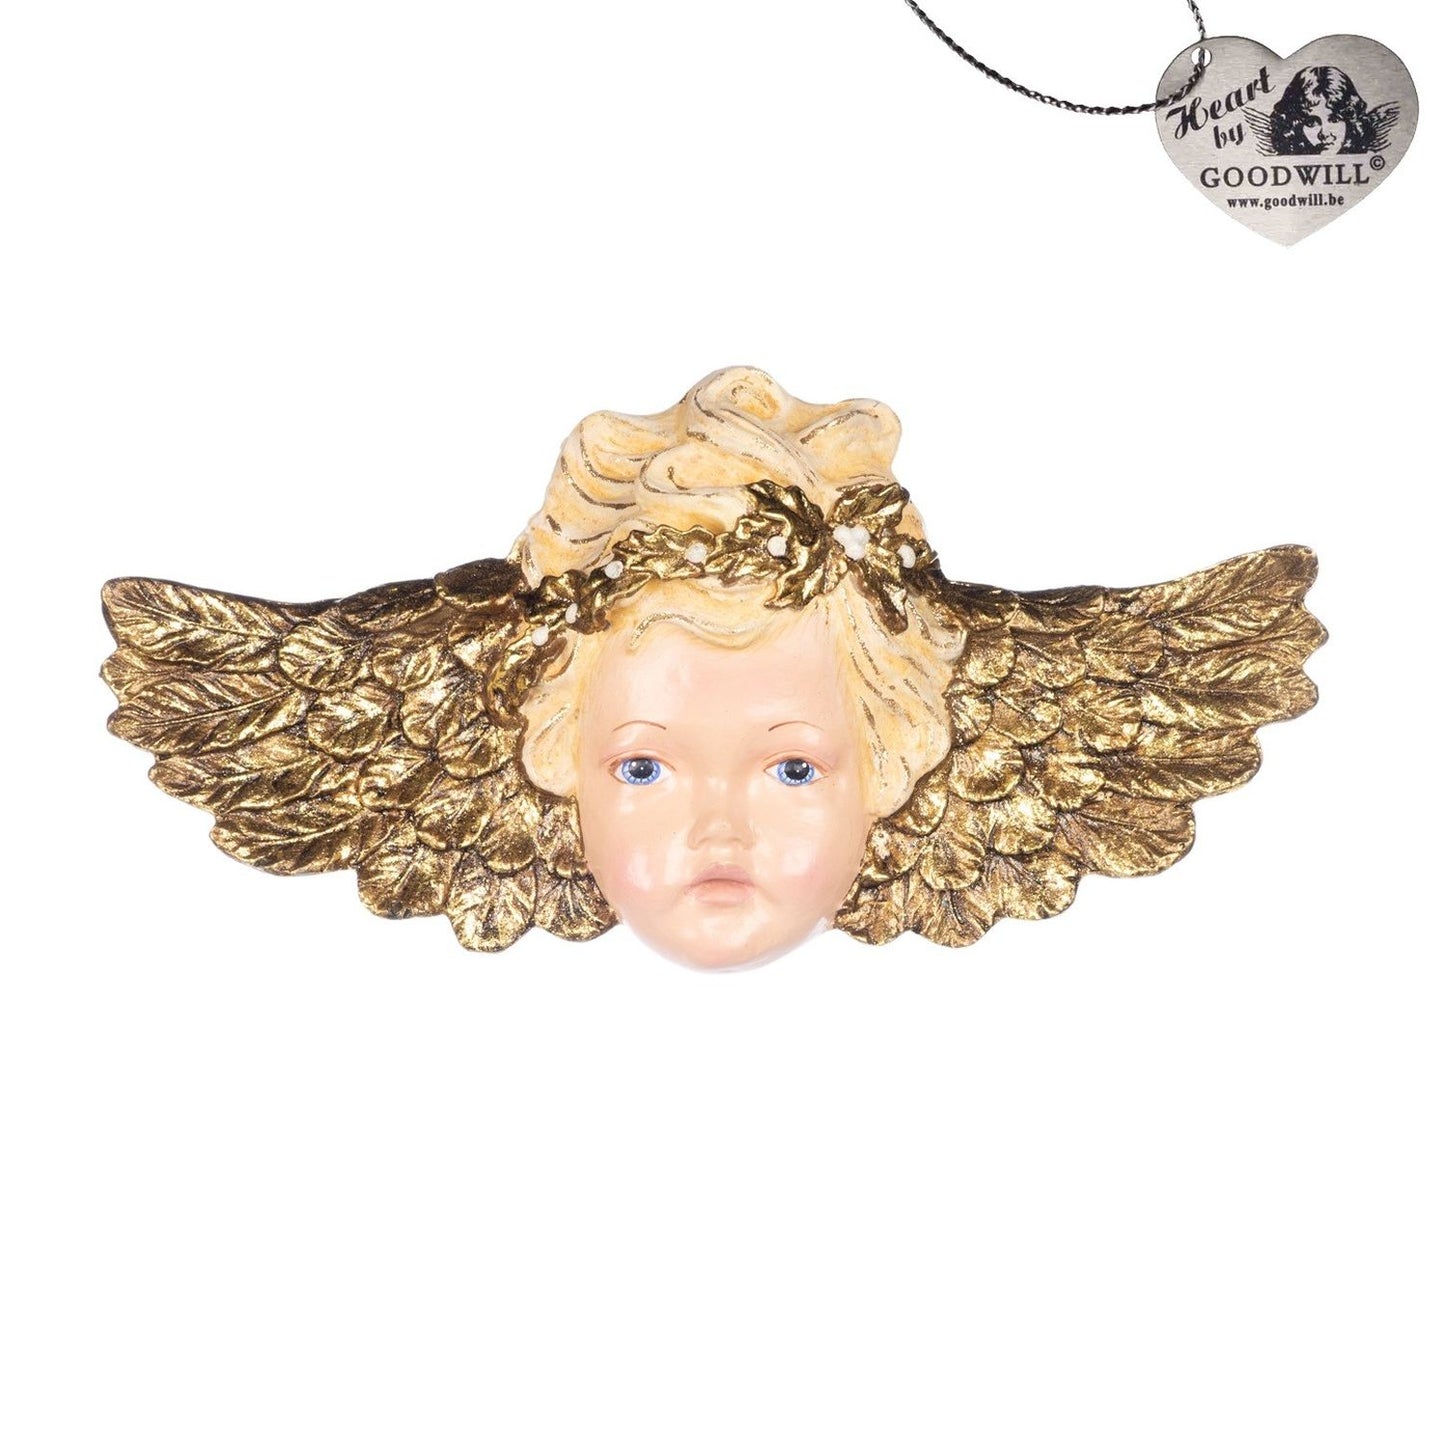 Goodwill Heavenly Display Cherub Head with Wings Gold 40Cm